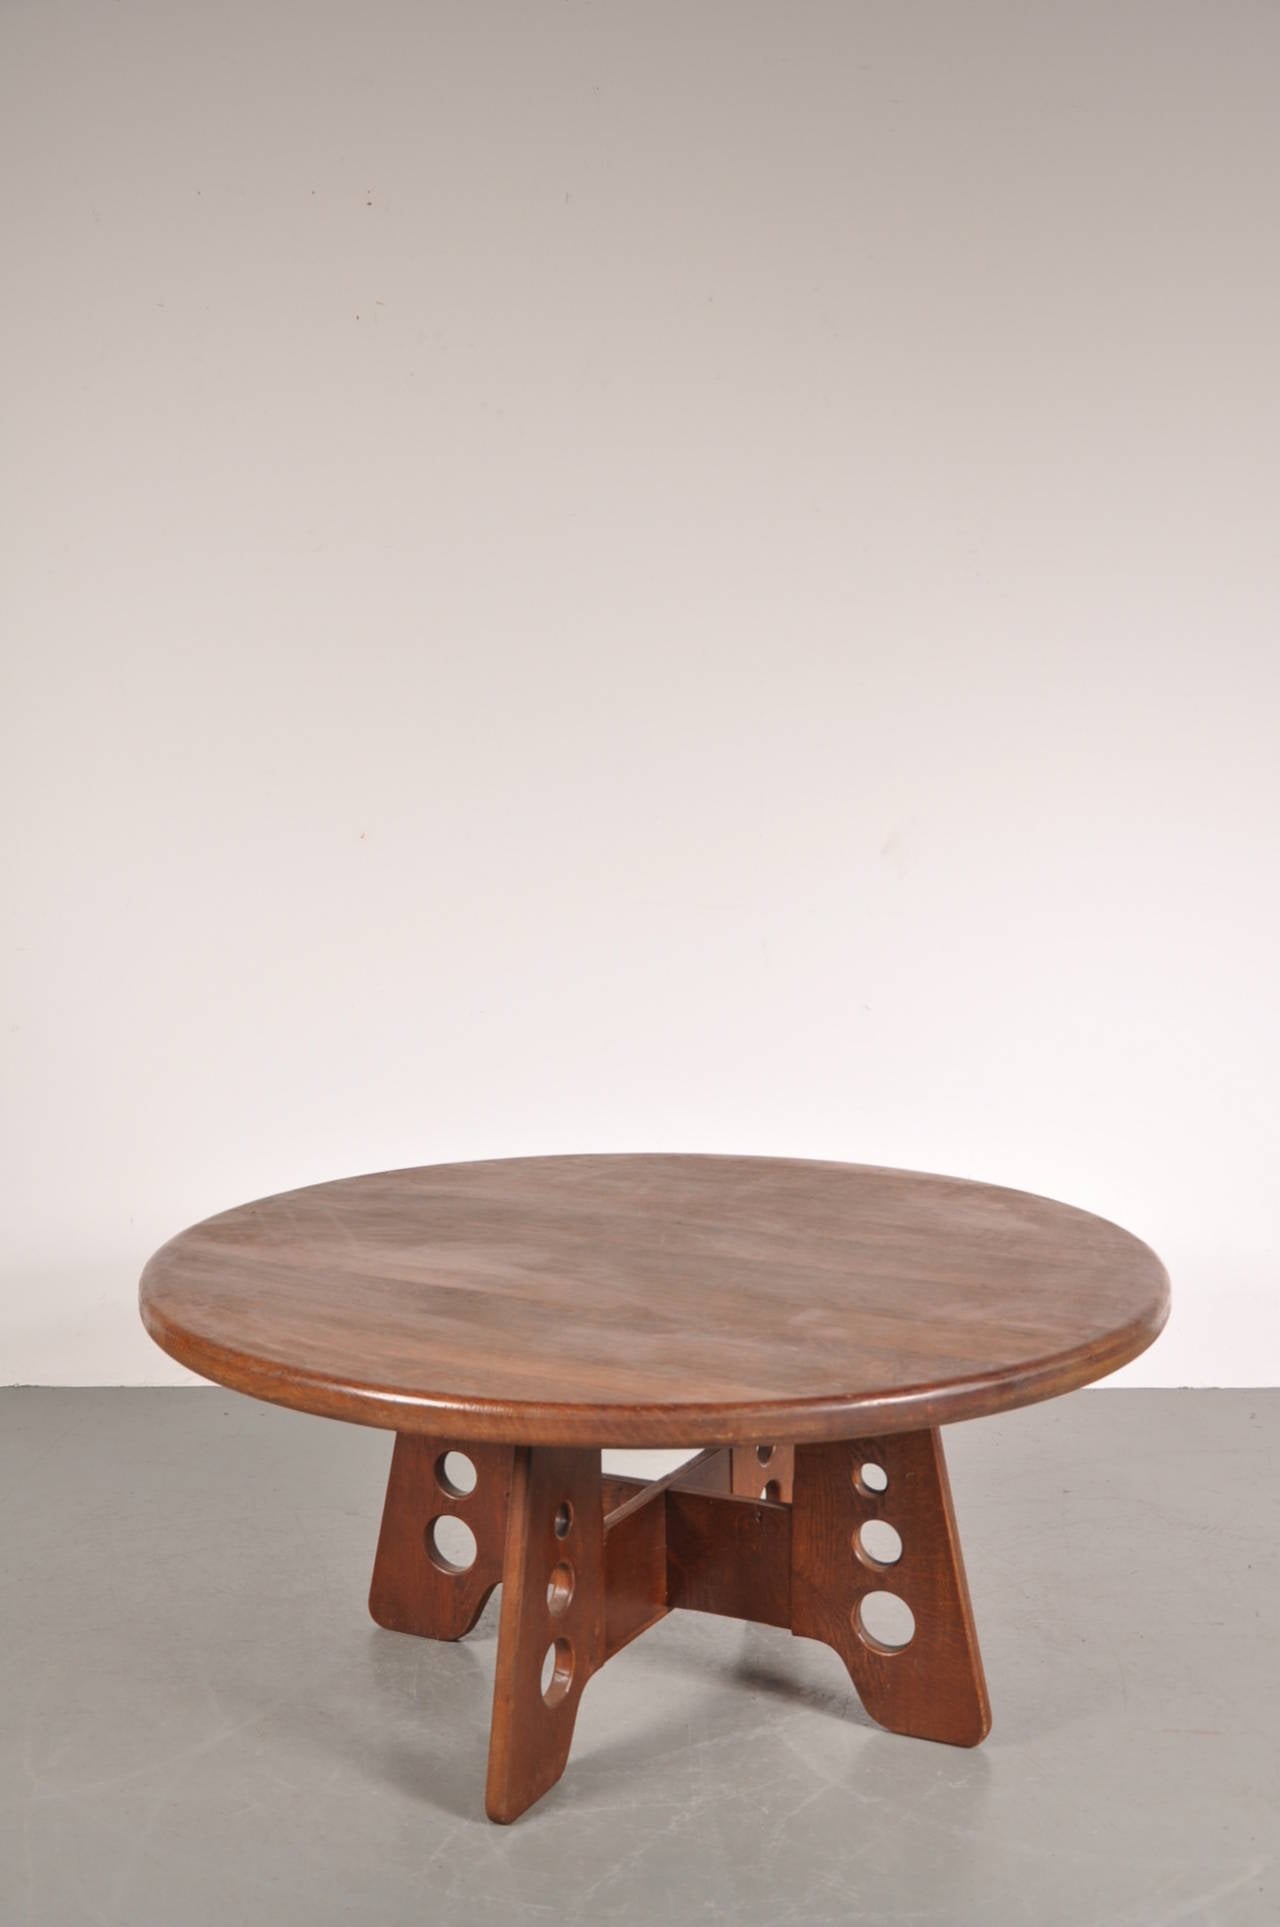 Rare round coffee table, manufactured in France around 1950.

This coffee table is made of the highest quality oak. It has a unique designed perforated base, four legs and a round top. This makes this coffee table a true eye-catcher in any modern